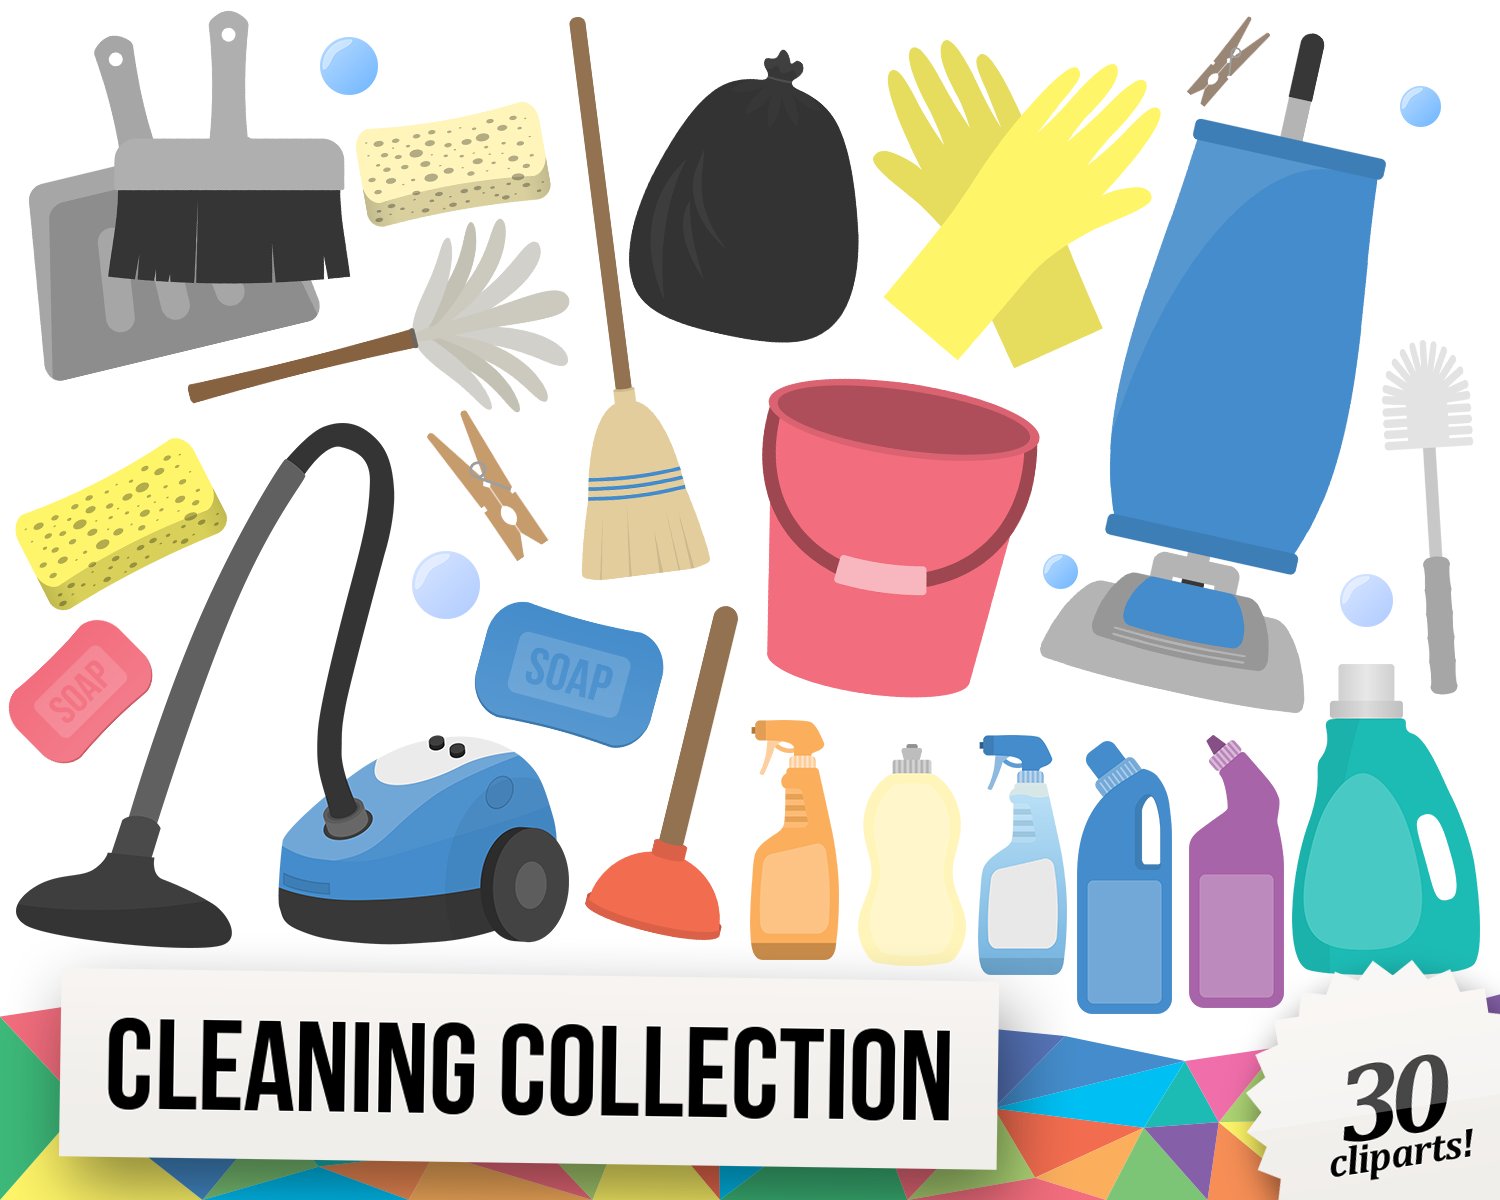 Cleaning Clipart Collection cover image.